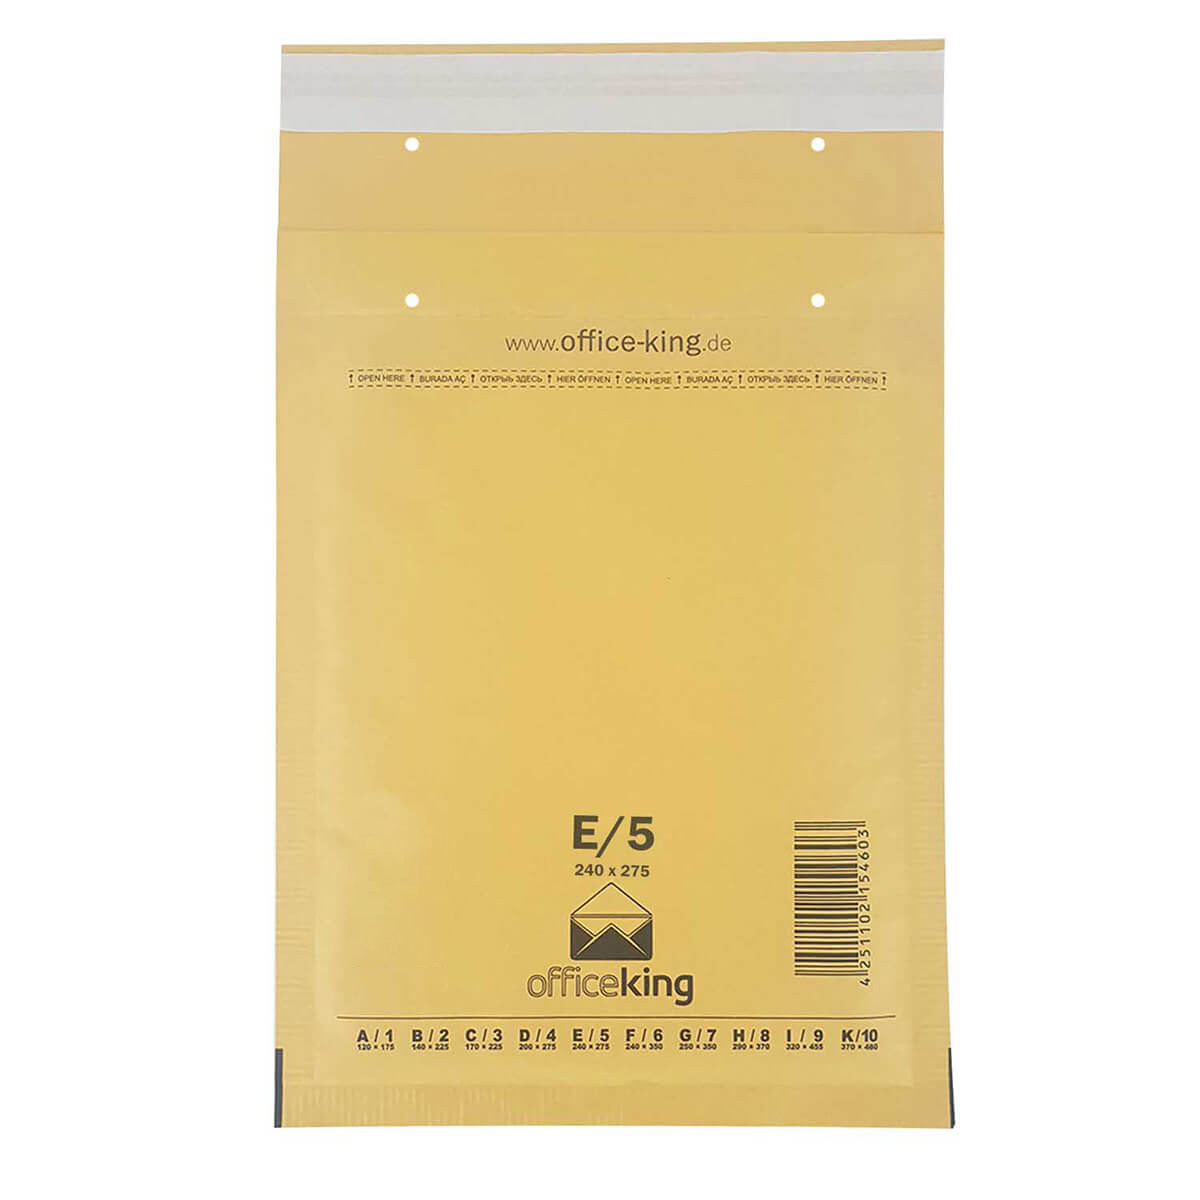 10x E5 Bubble mailers brown 240 x 275 mm - officeking